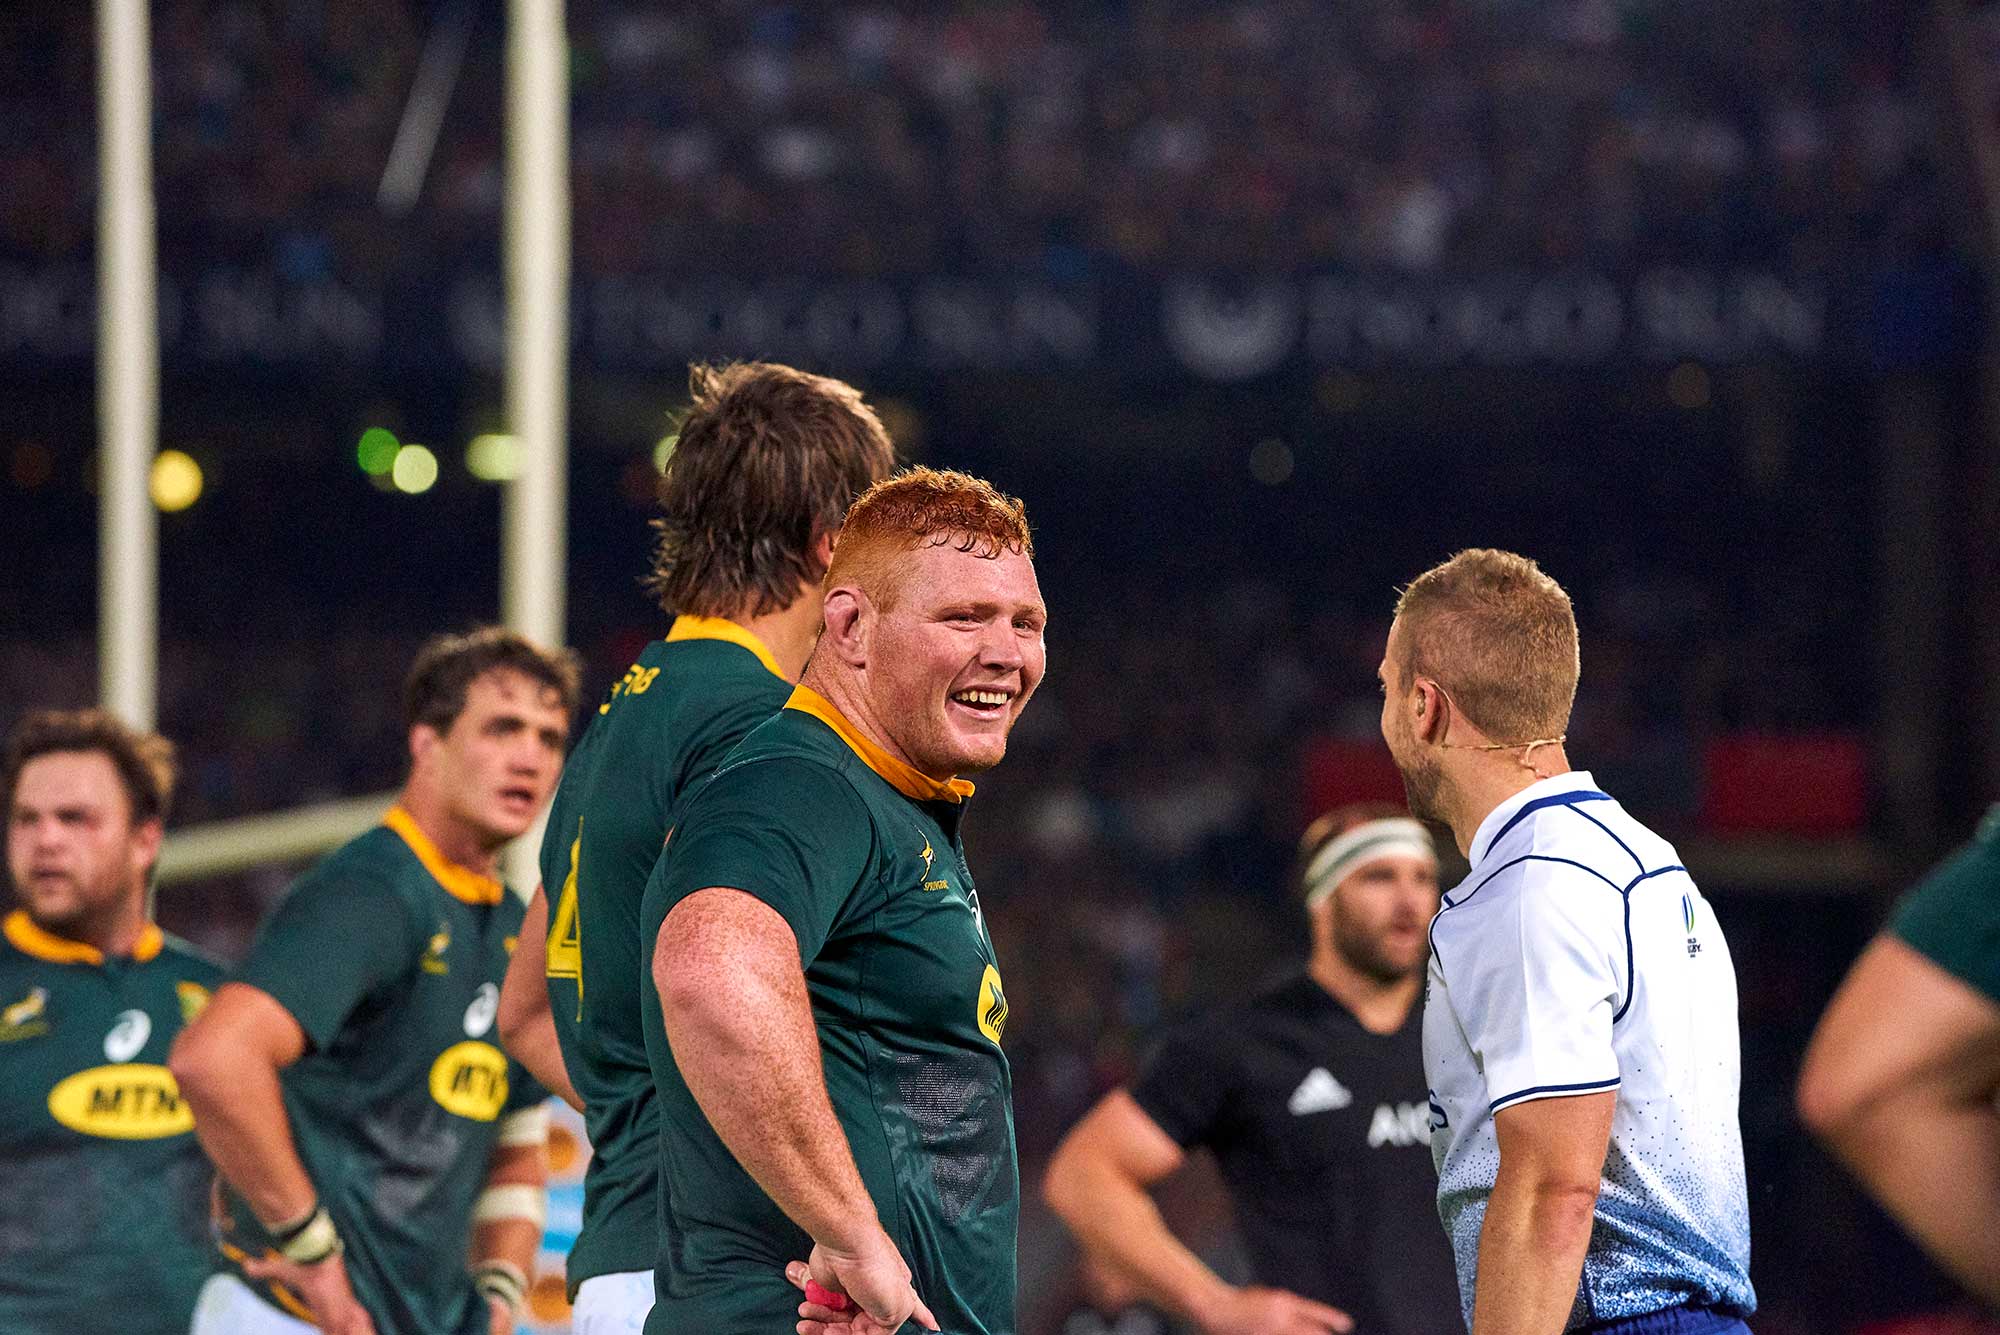 live action rugby imagery of rugby world cup 2019 champions the Springboks as they take on New Zealand